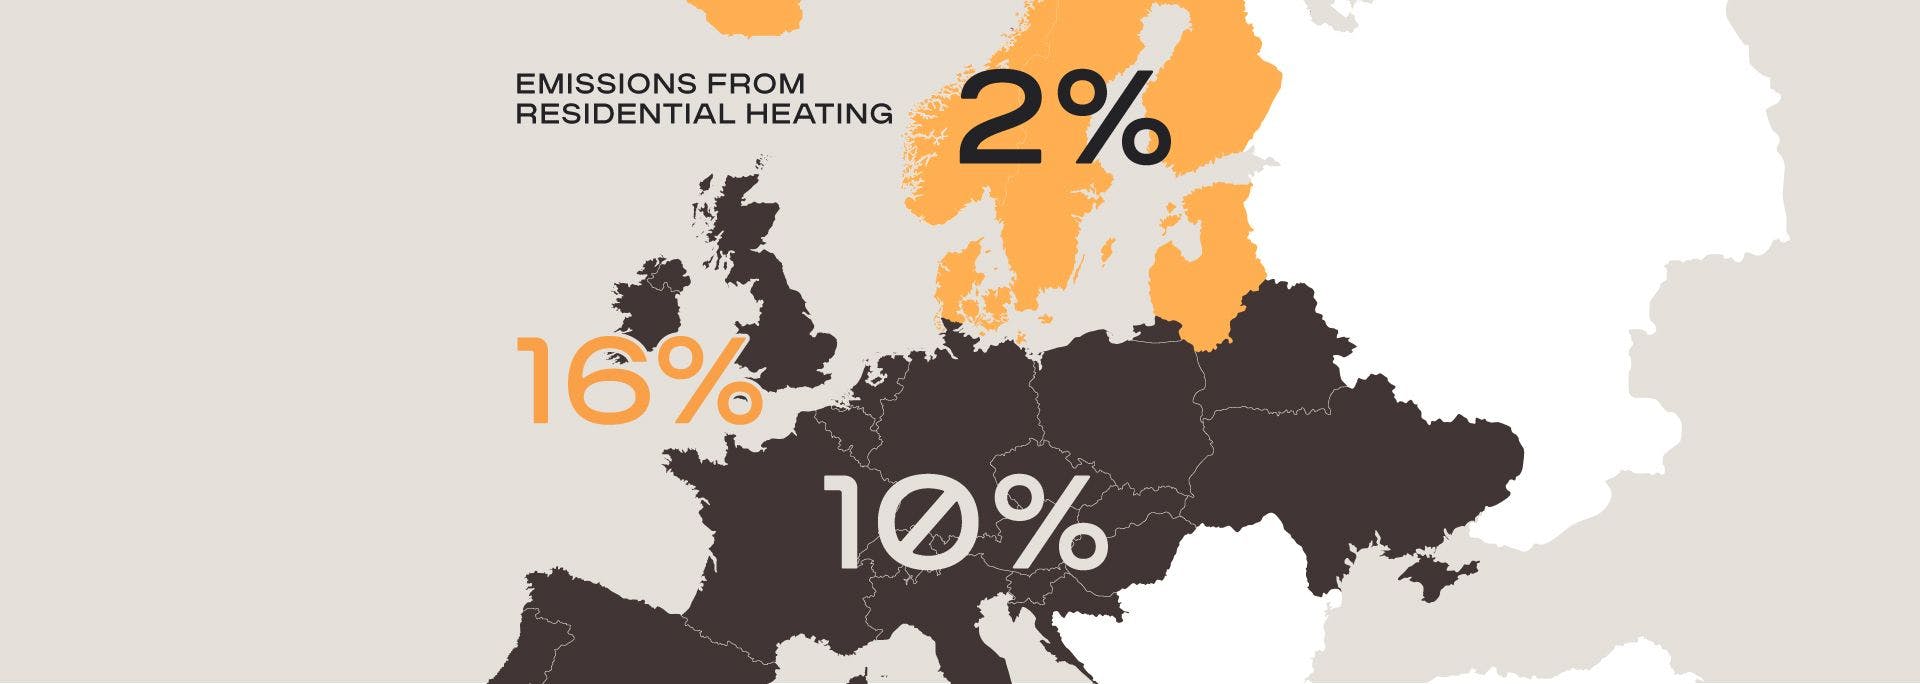 Map of Europe showing the UK having 16% of emissions coming from residential heating, with mainland Europe being 10% and Scandinavian countries only being 2%